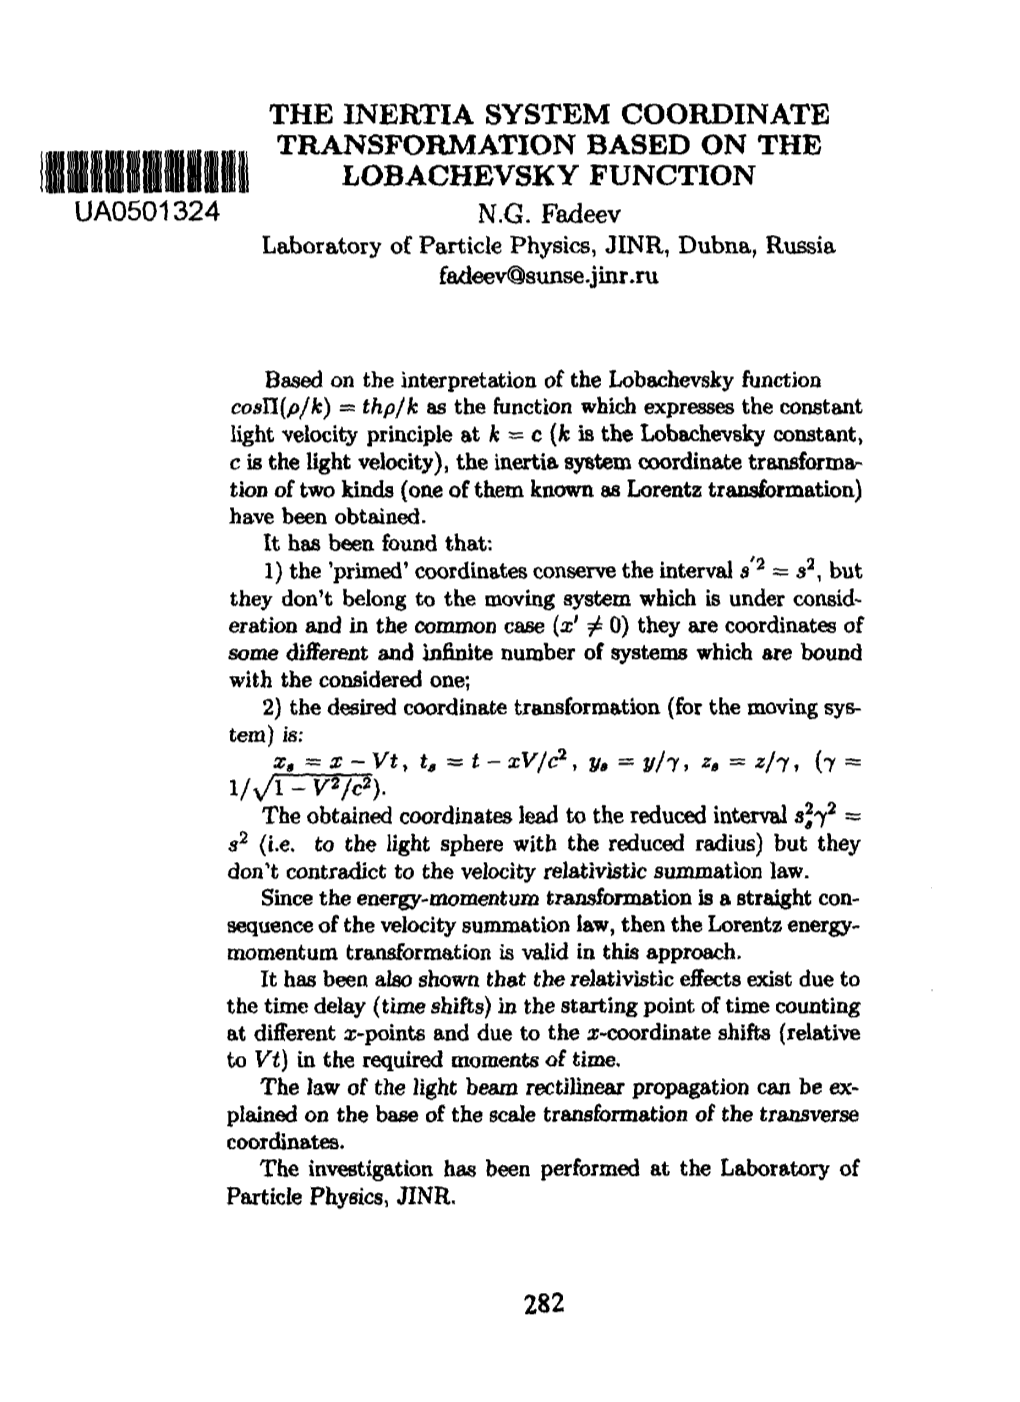 The Inertia System Coordinate Transformation Based on the Lobachevsky Function Ua0501324 N.G